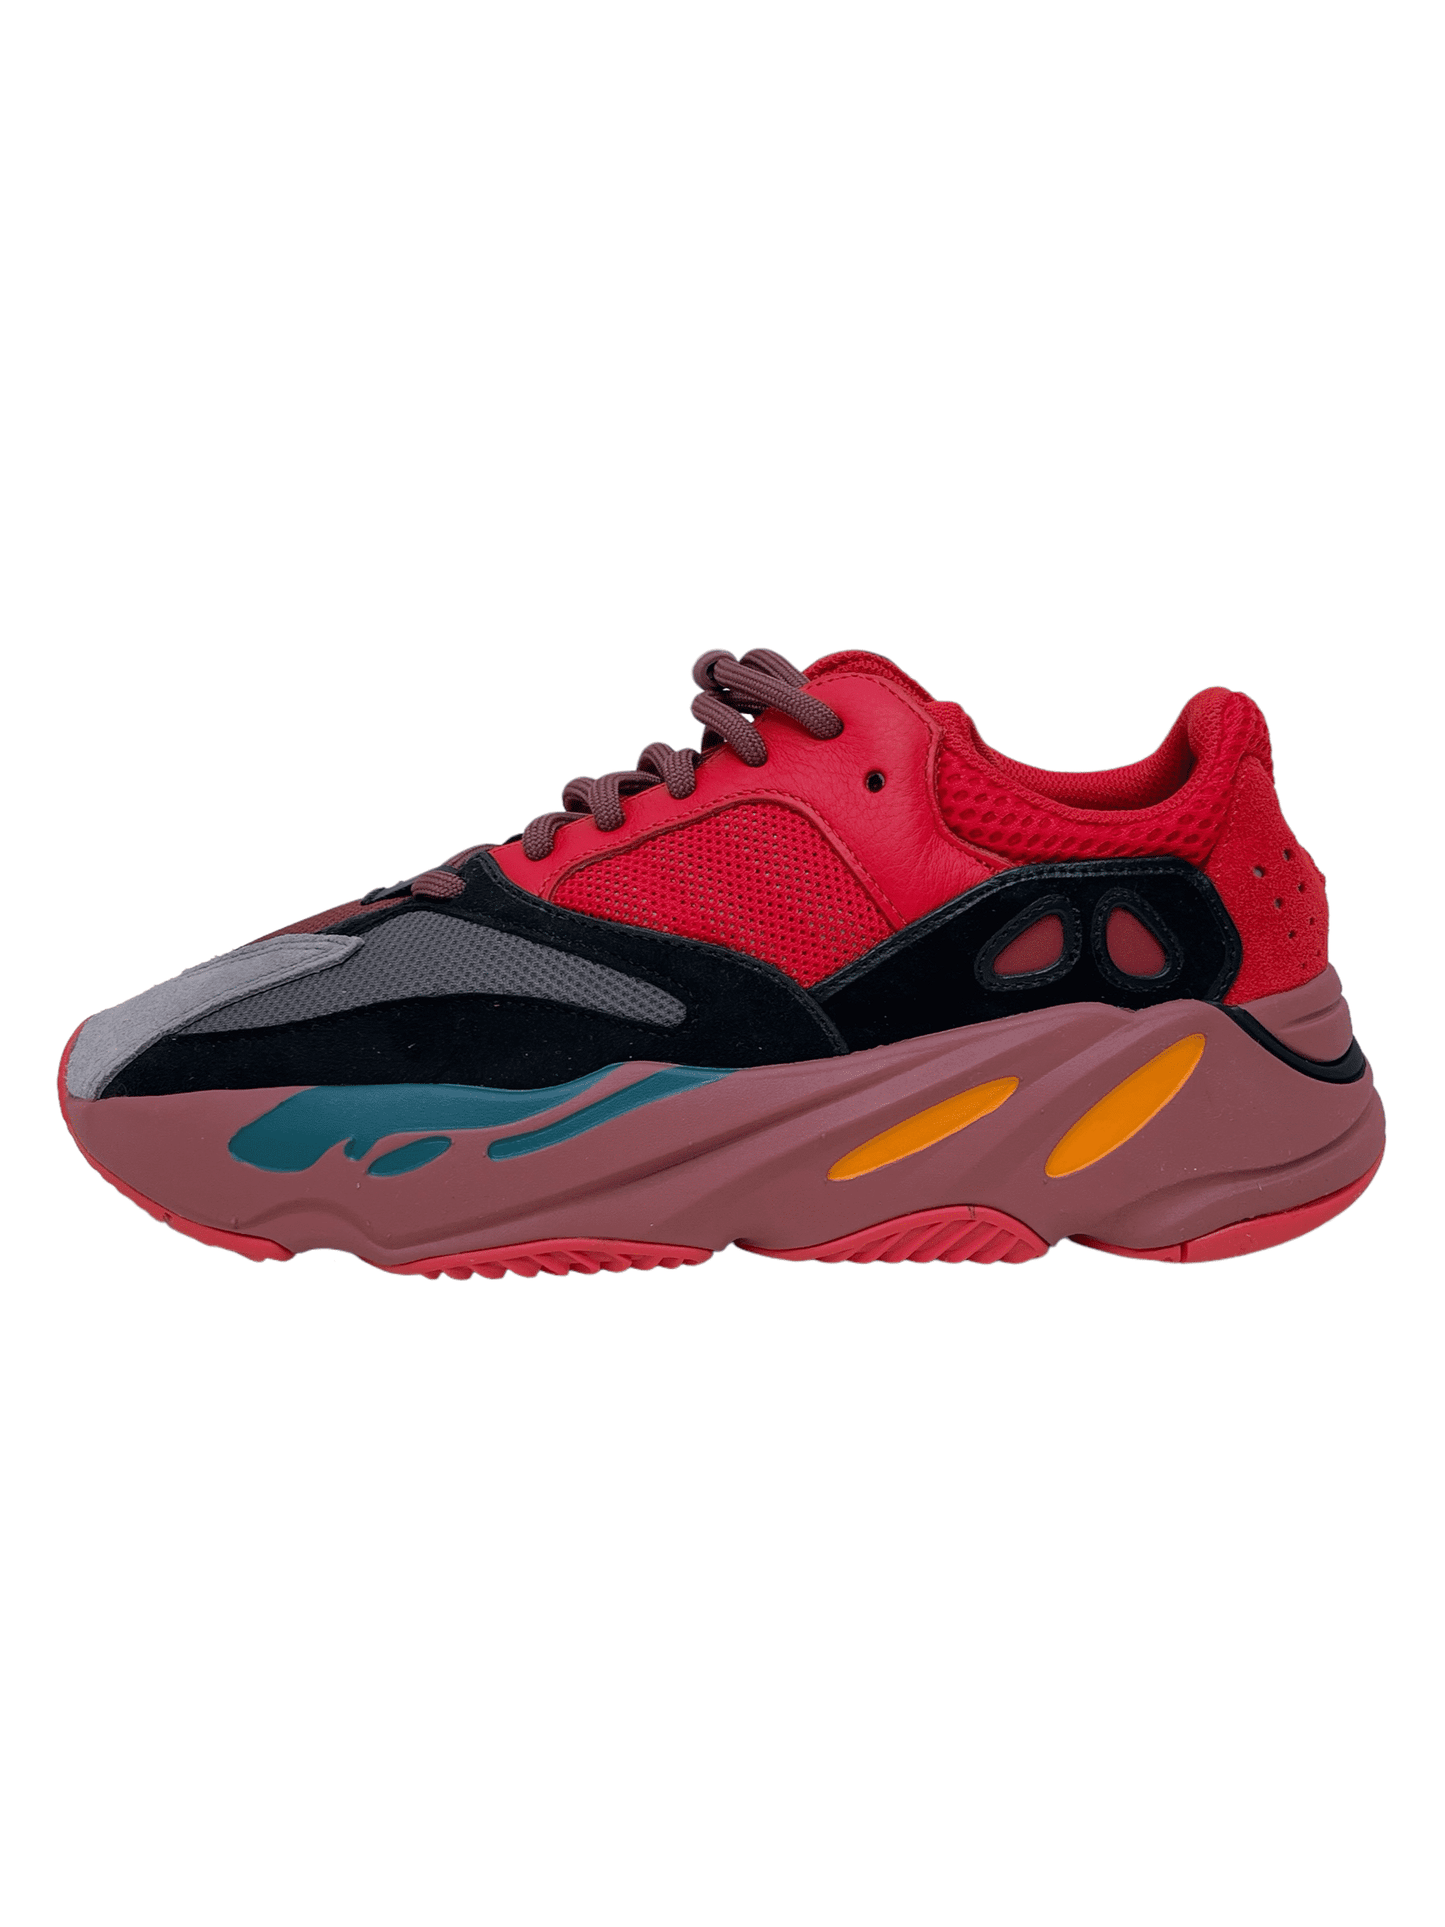 Adidas Yeezy 700 Hi-Res Red Sneakers - Genuine Design Luxury Consignment for Men. New & Pre-Owned Clothing, Shoes, & Accessories. Calgary, Canada